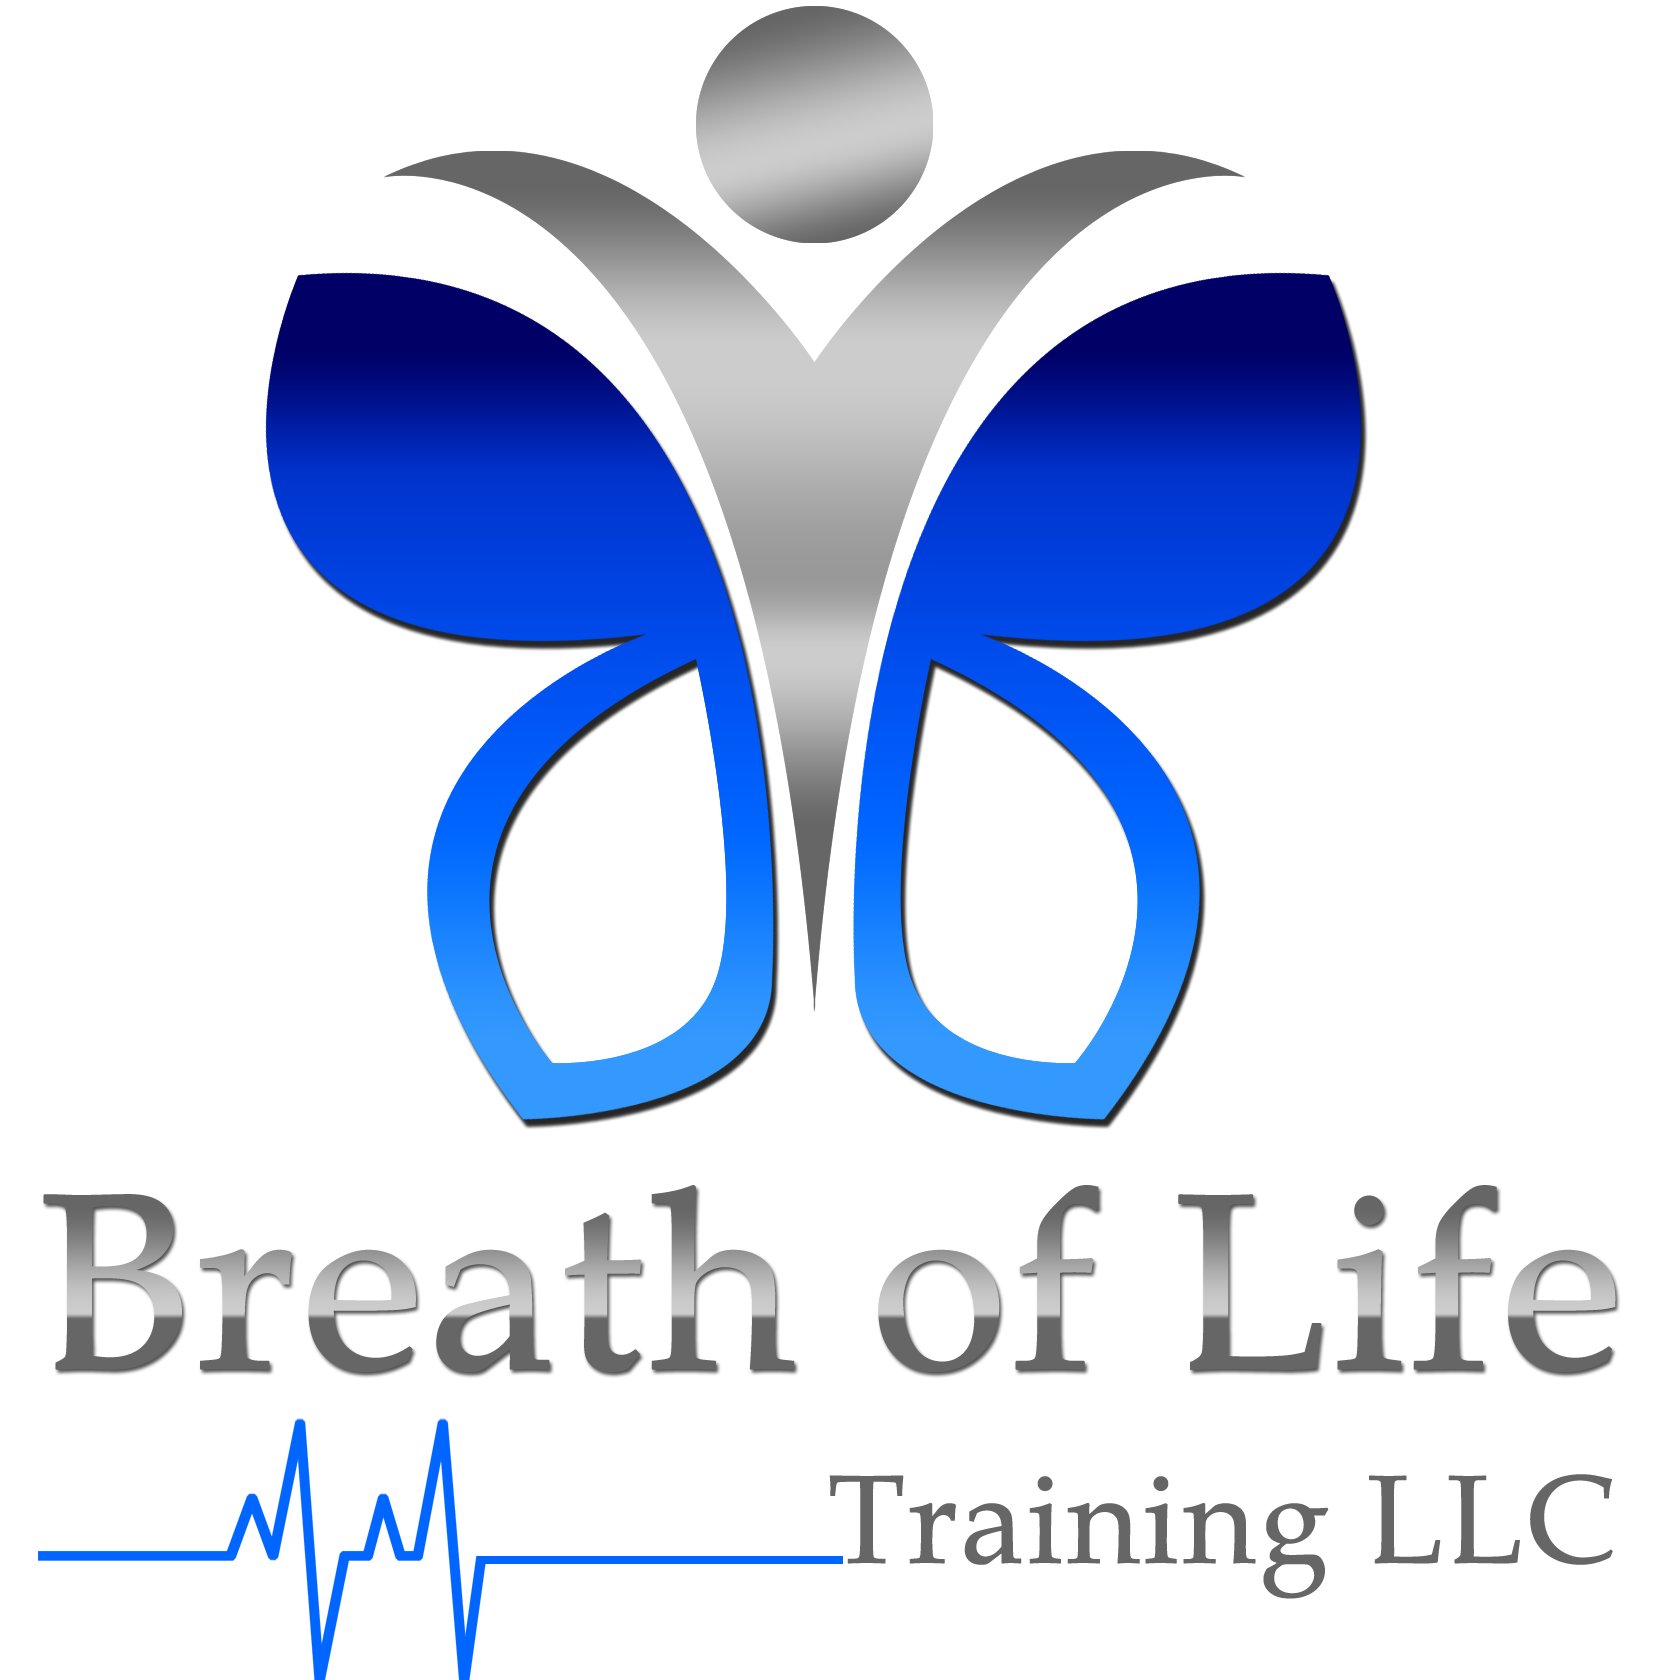 Breath of Life Training LLC is your one-stop-shop for medical training and employment needs.